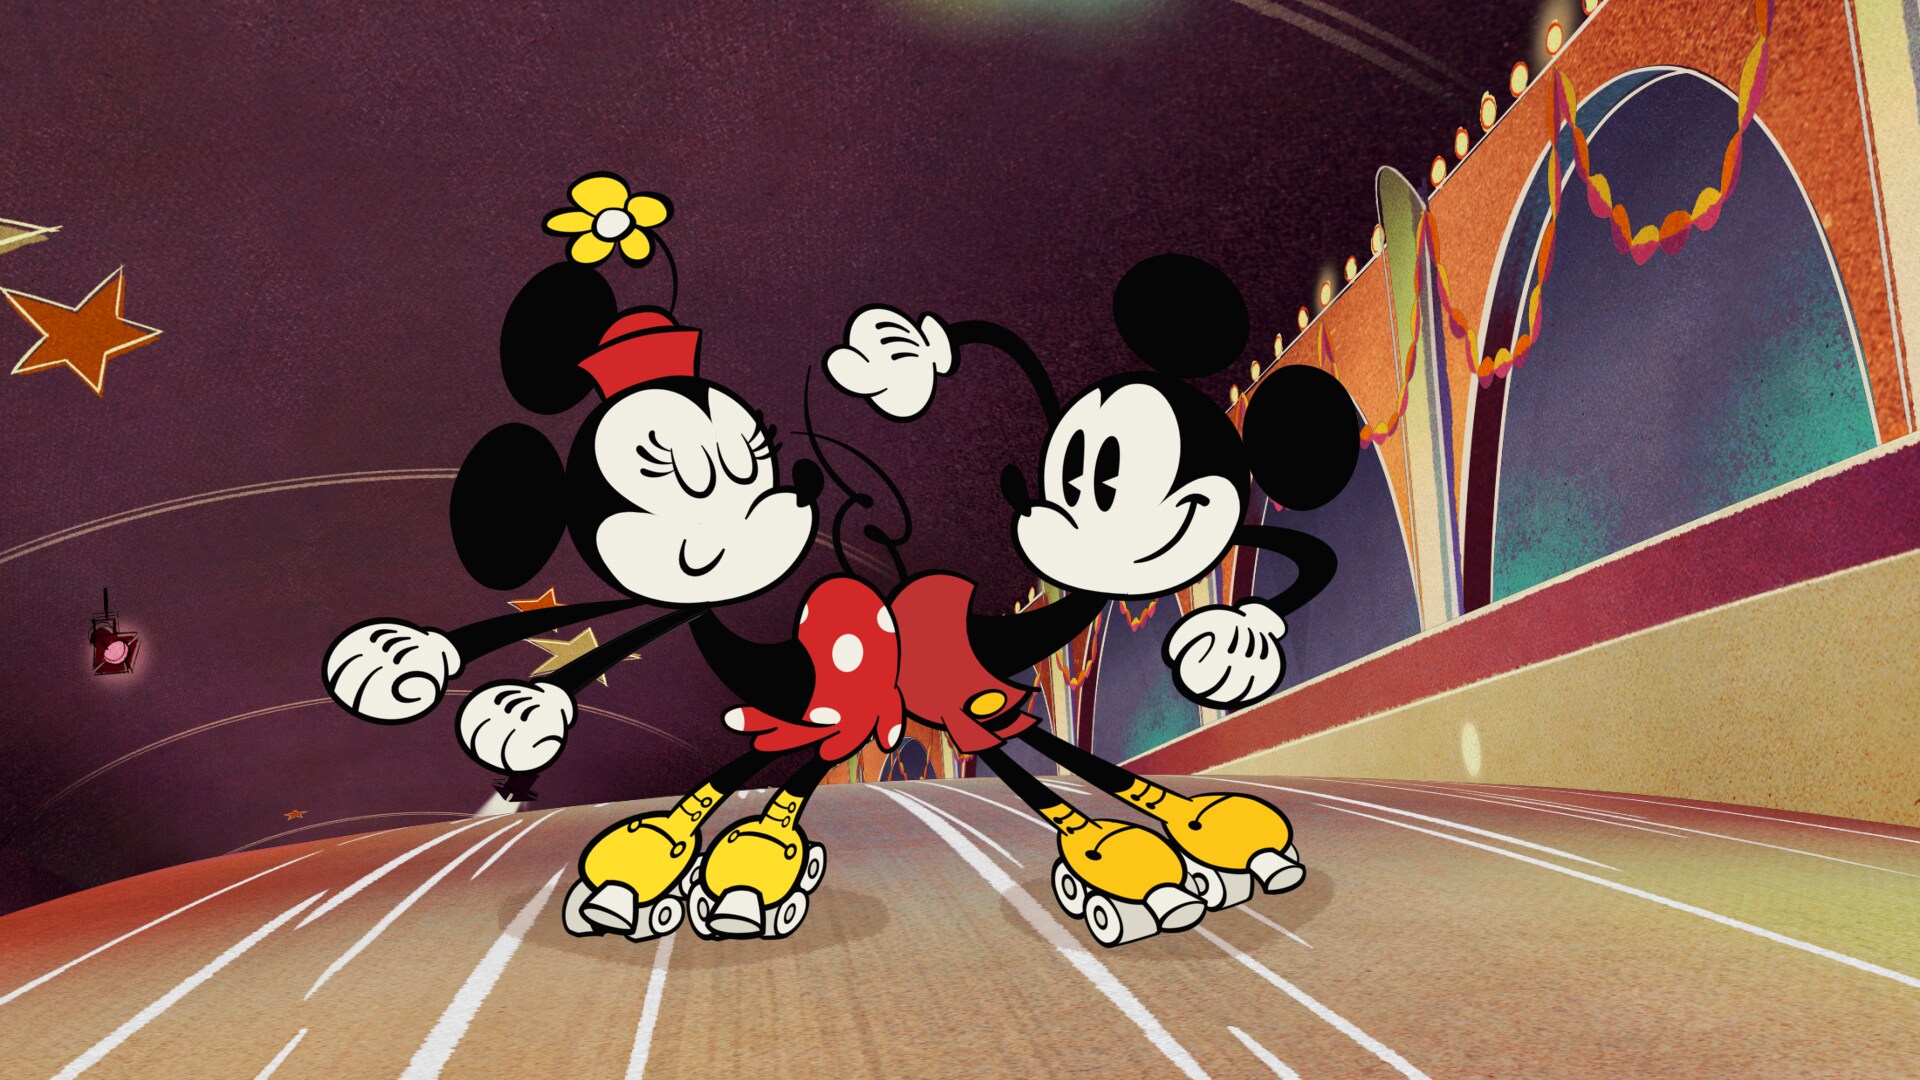 THE WONDERFUL WORLD OF MICKEY MOUSE - "Keep on Rollin" - Mickey and his friends' disco night at the roller rink is placed in peril when Peg-Leg Pete and his gang crash the party and ruin the fun. (Disney+) MINNIE MOUSE, MICKEY MOUSE